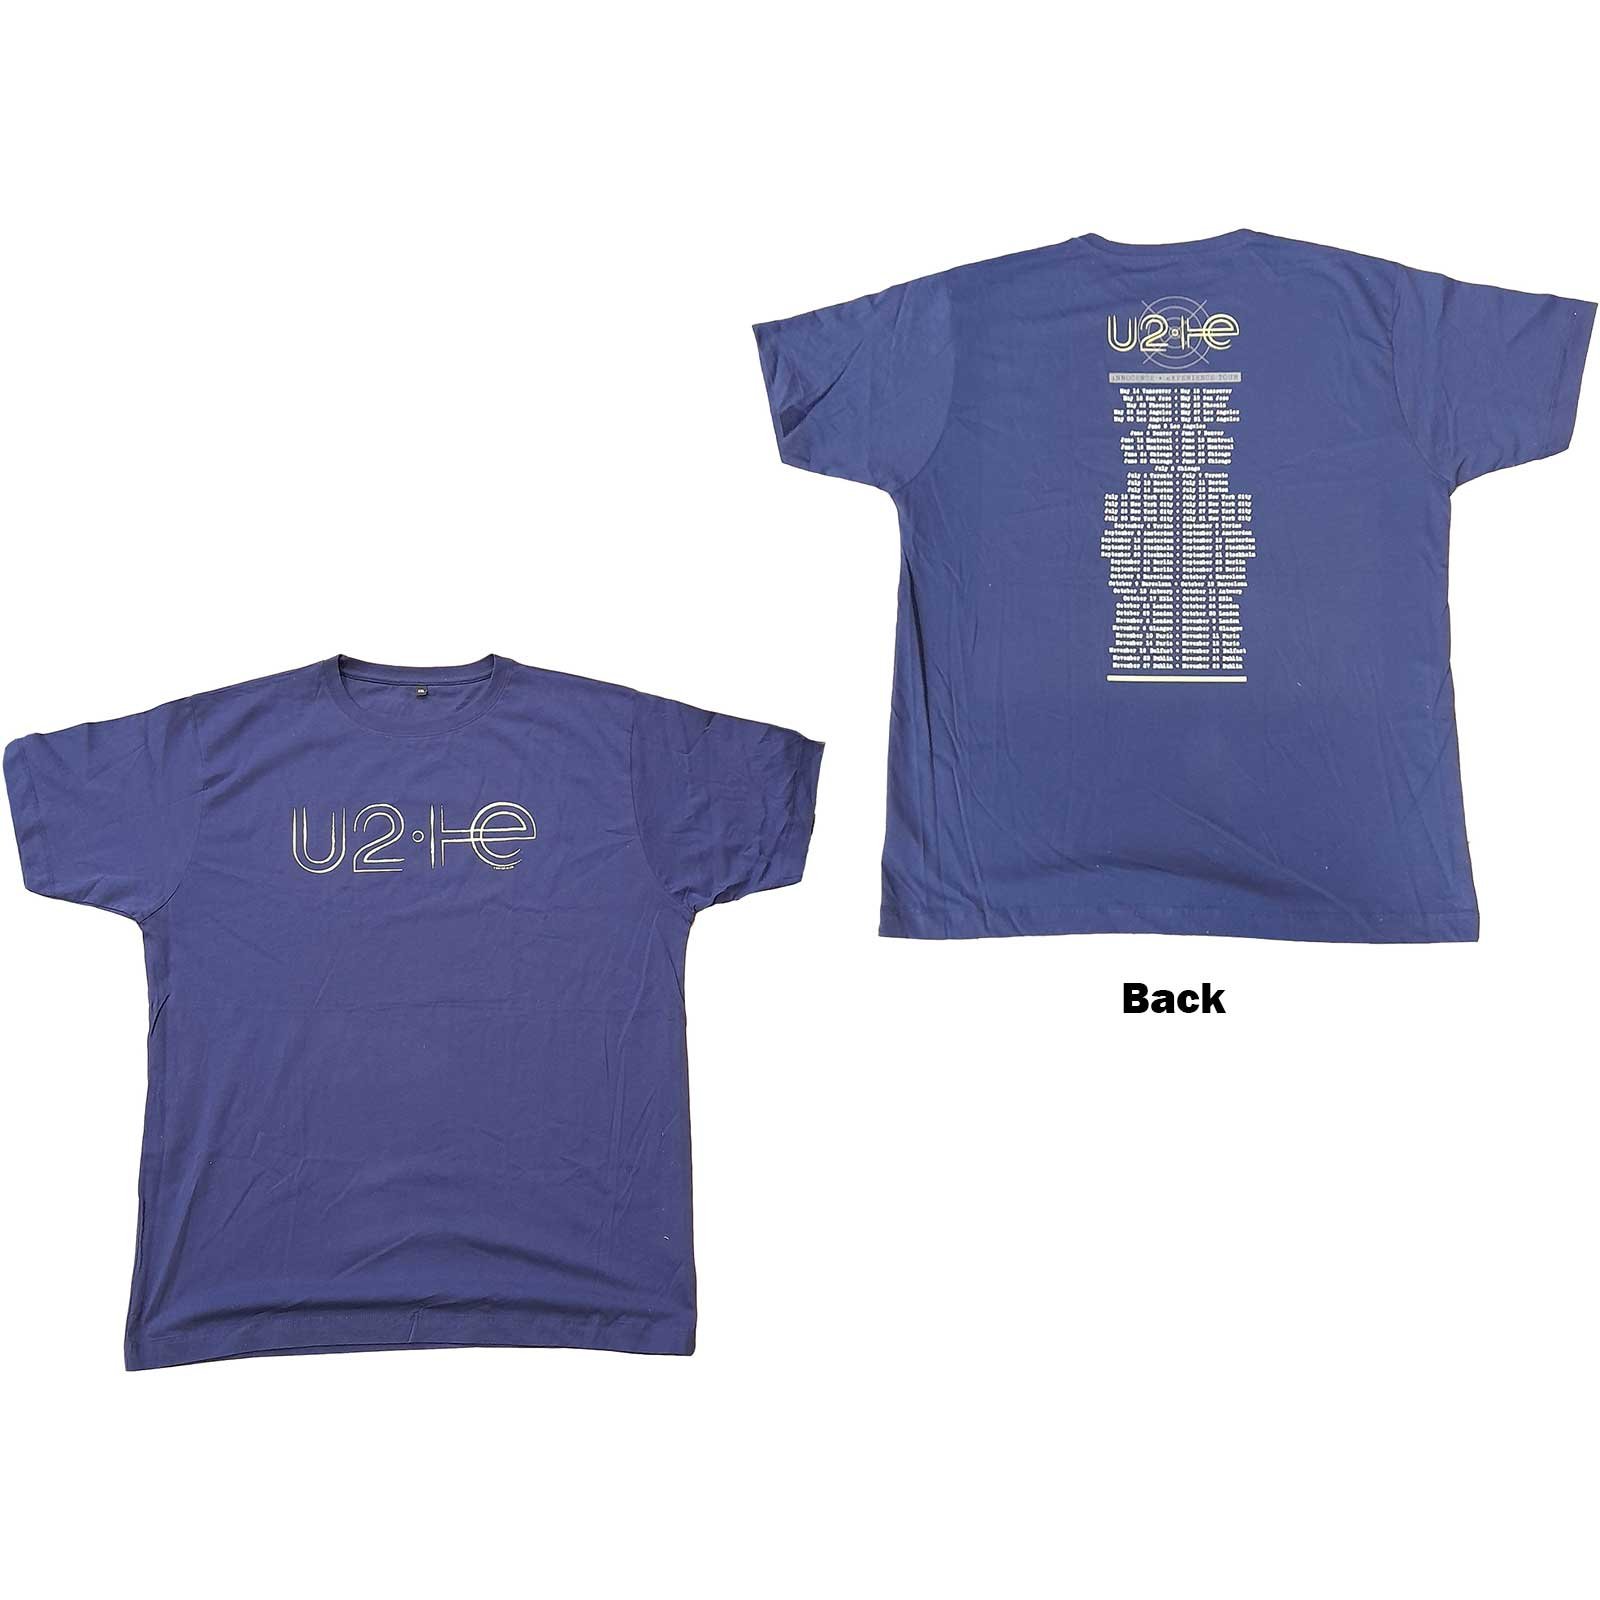 U2 Merchandise - Find our selection t-shirts and more > iMusic